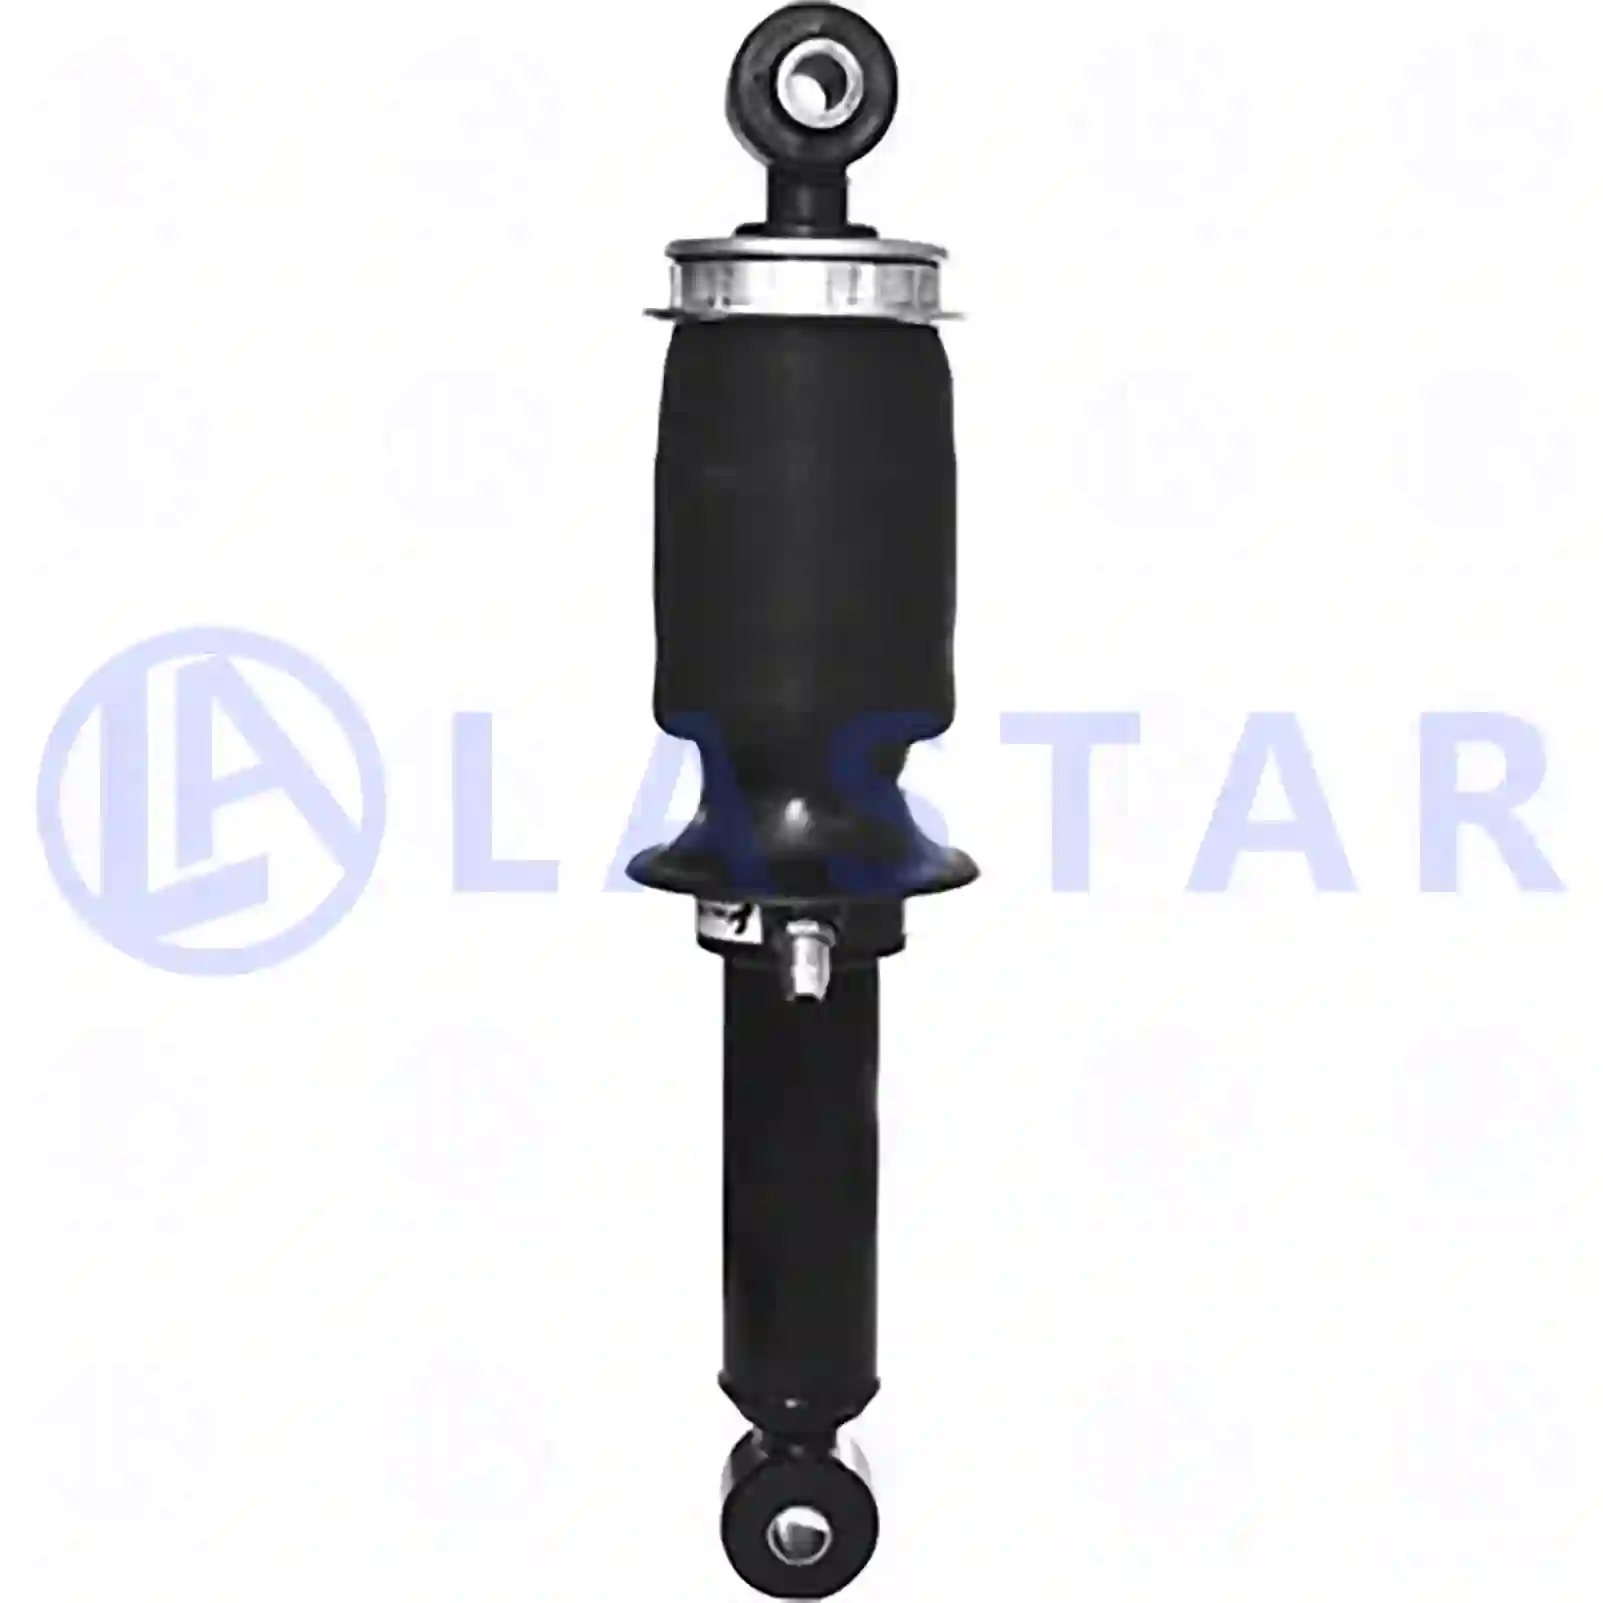 Cabin shock absorber, with air bellow, 77735596, 504060233, , , ||  77735596 Lastar Spare Part | Truck Spare Parts, Auotomotive Spare Parts Cabin shock absorber, with air bellow, 77735596, 504060233, , , ||  77735596 Lastar Spare Part | Truck Spare Parts, Auotomotive Spare Parts